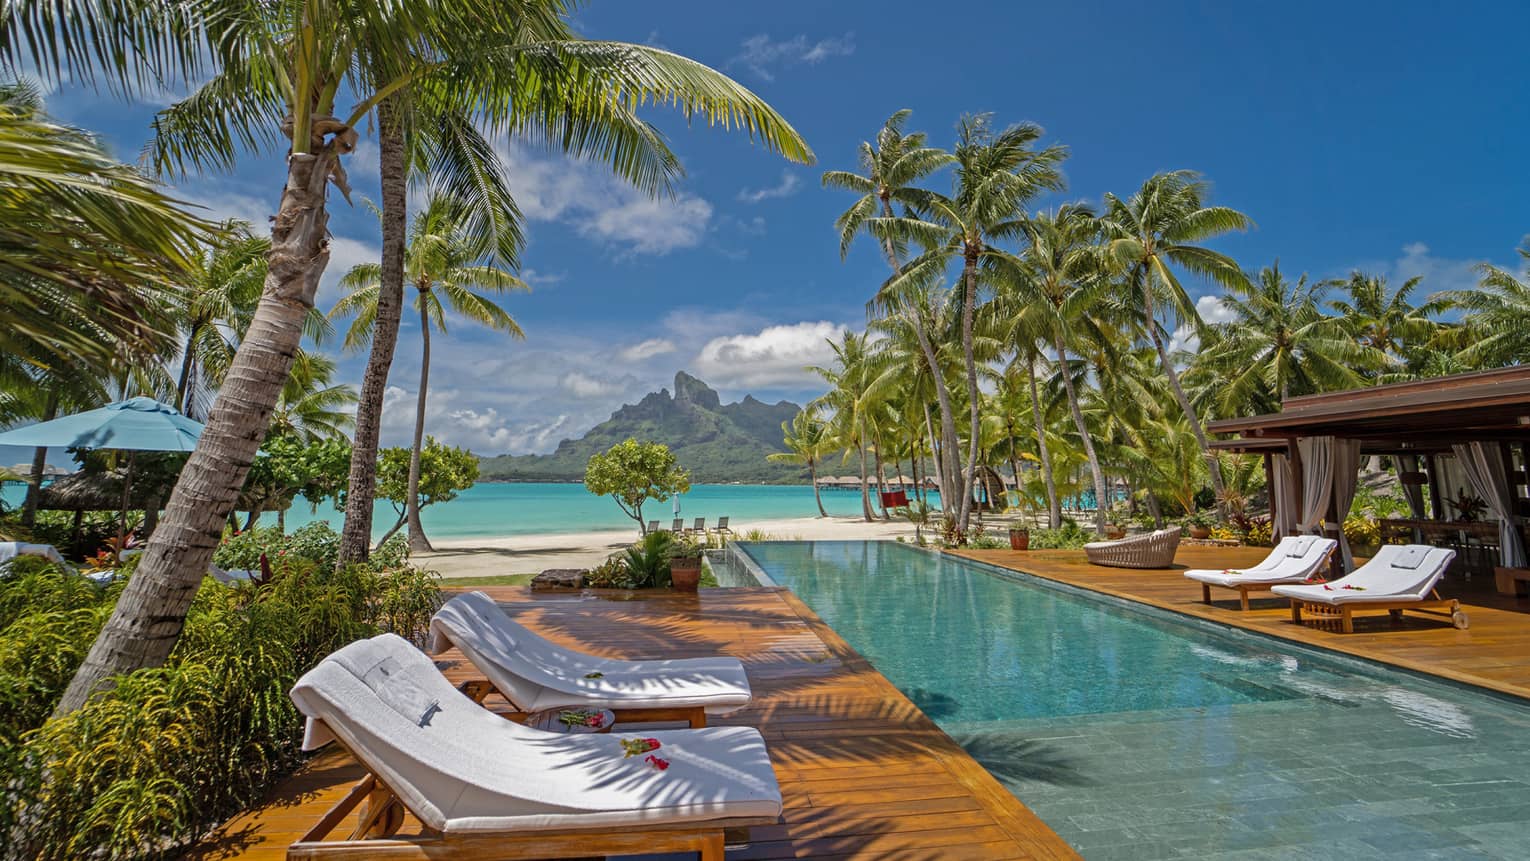 Long rectangular pool with lounge chairs in Bora Bora villa, with view of turquoise lagoon